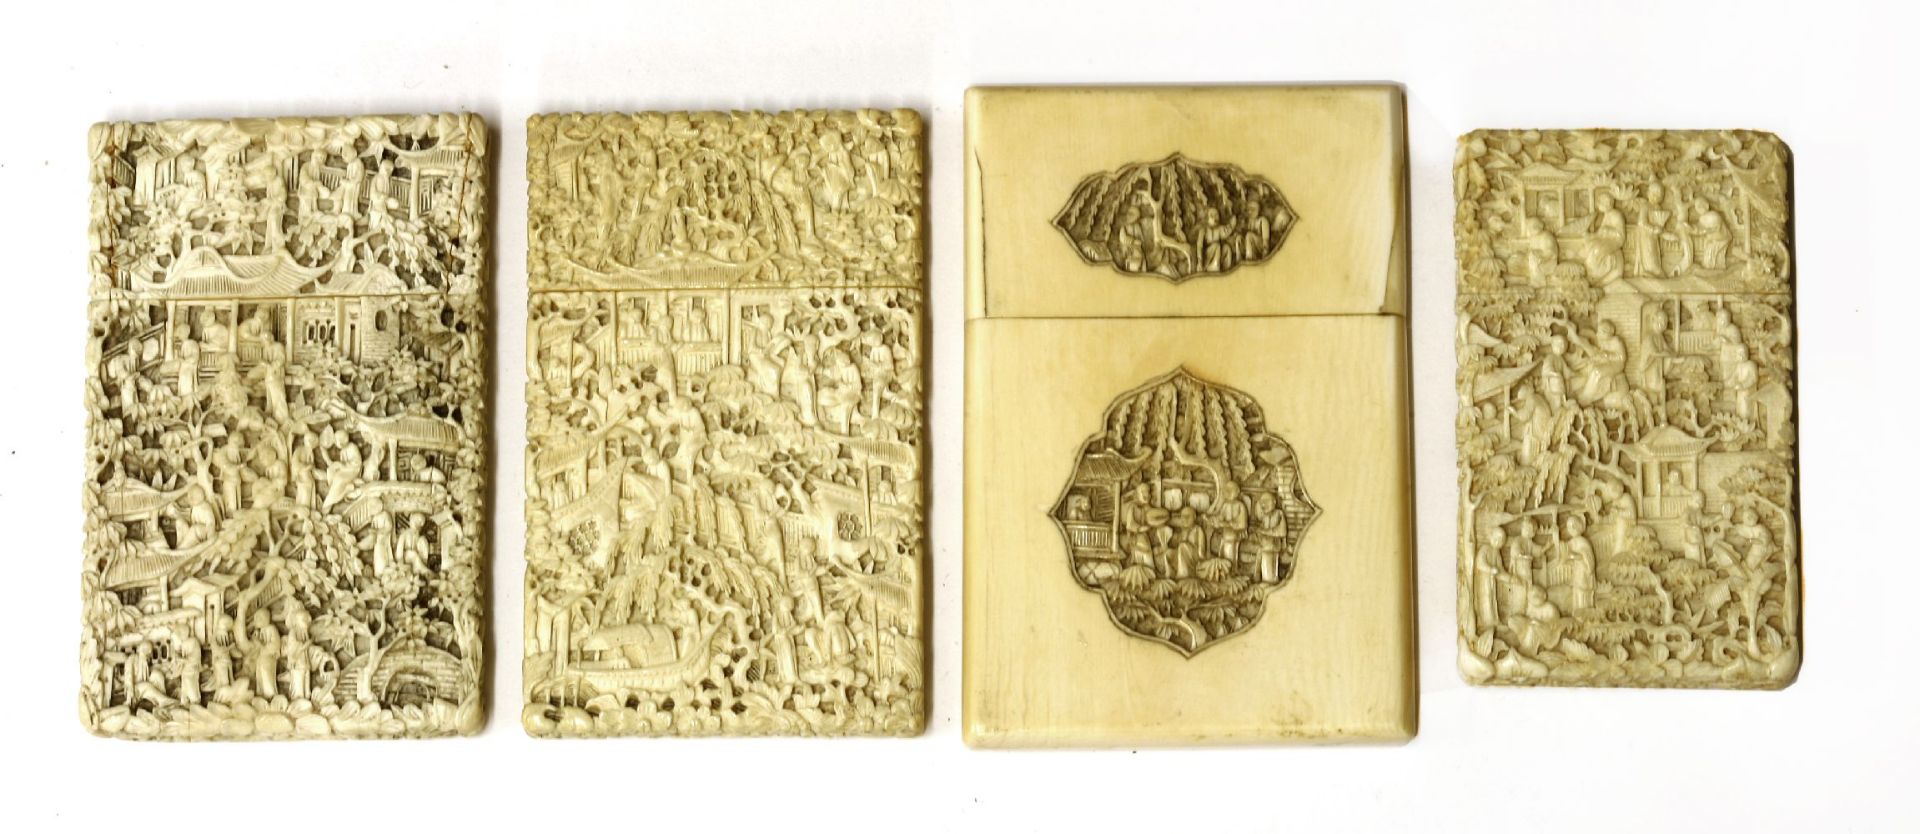 Four ivory cases,carved with figures in landscapes, pagodas, trees and foliage,largest 11.5 x 7. - Image 2 of 2